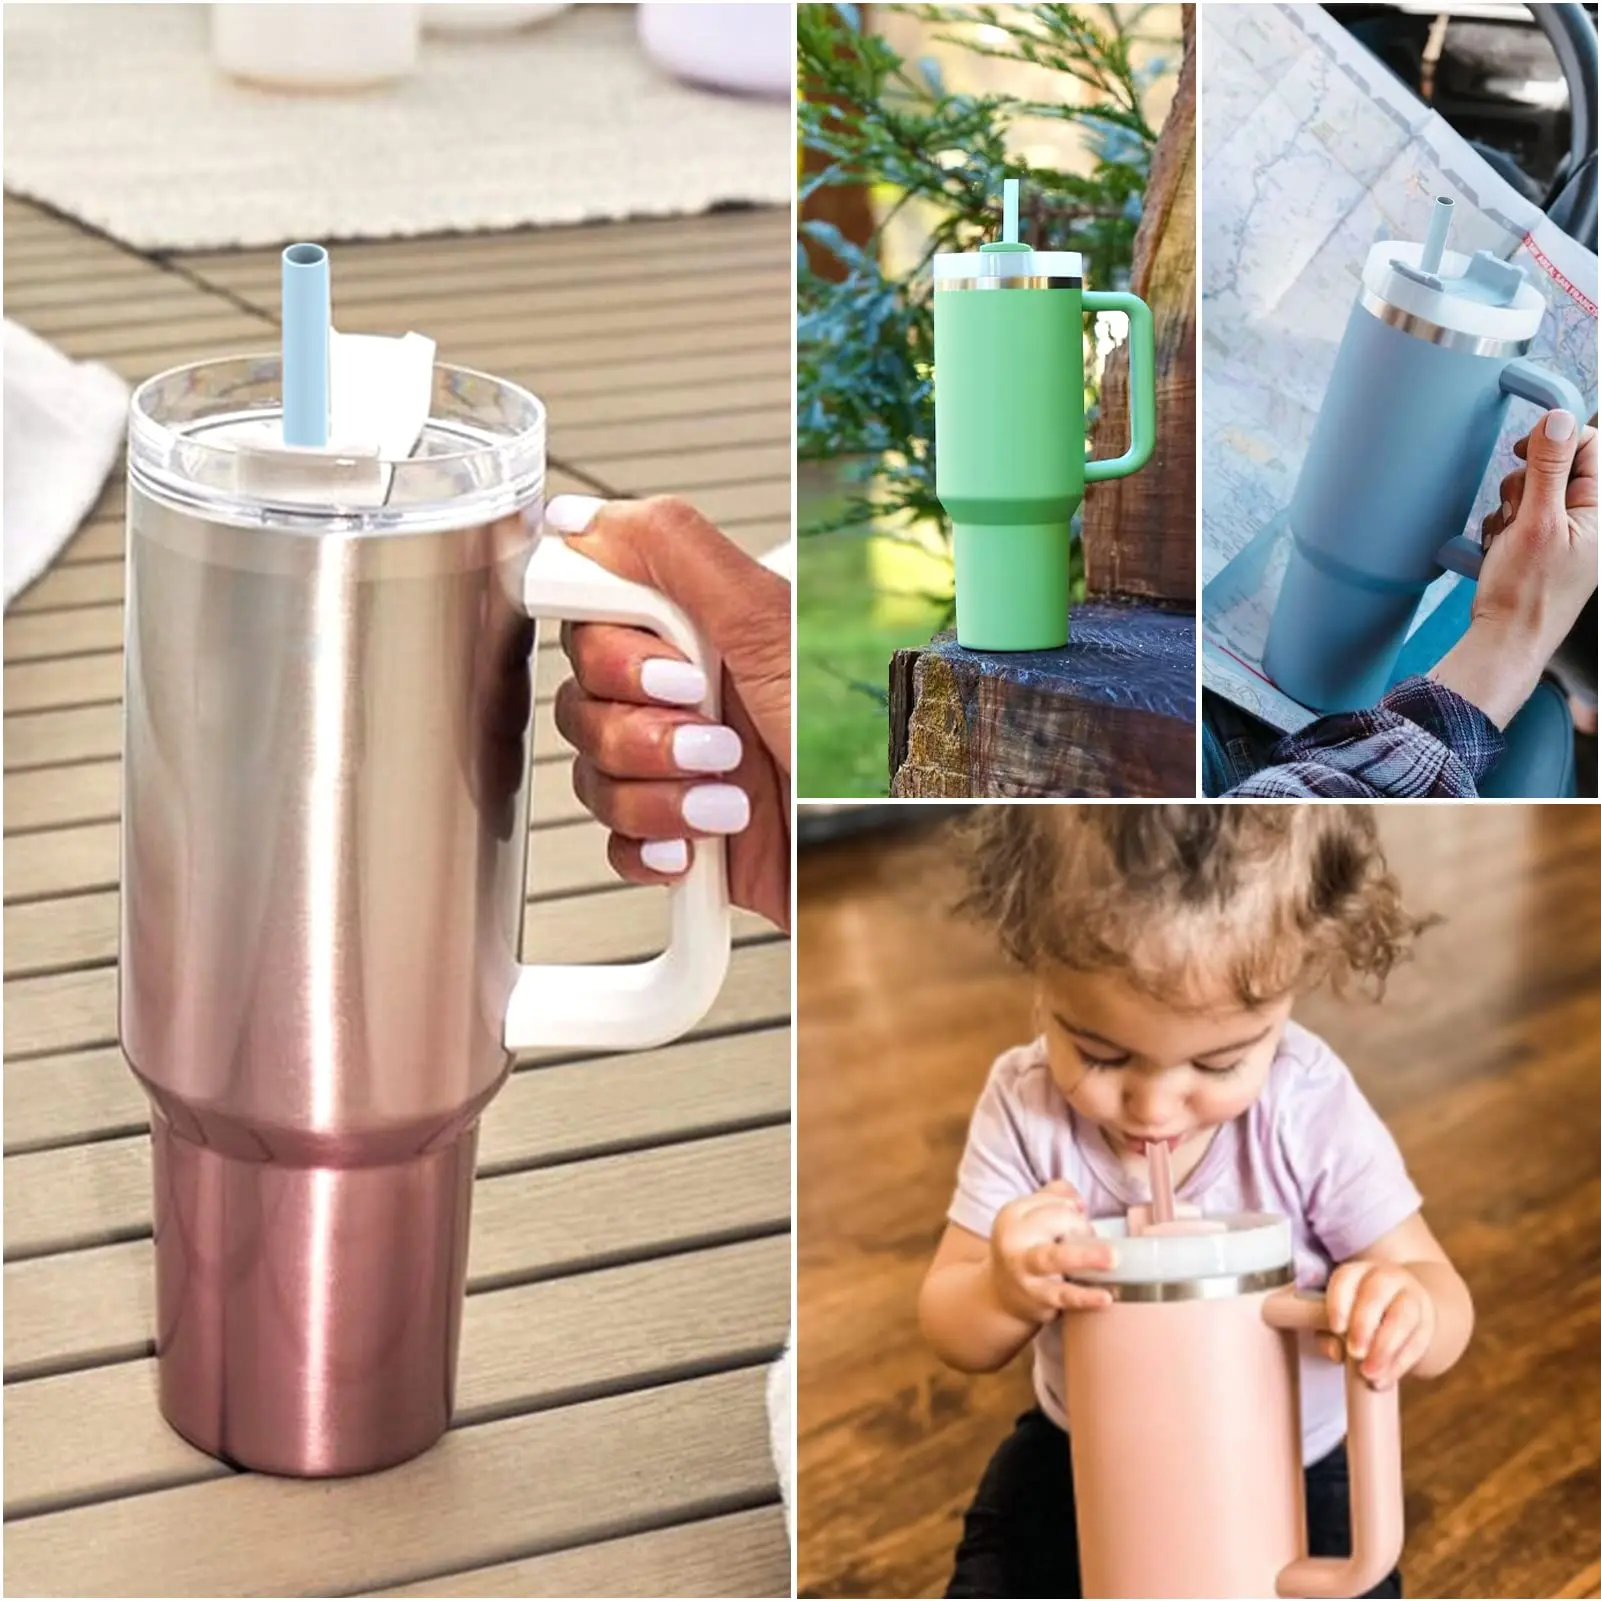 Kids & Toddler Glass Cups with Silicone Sleeves & Straws (4pack